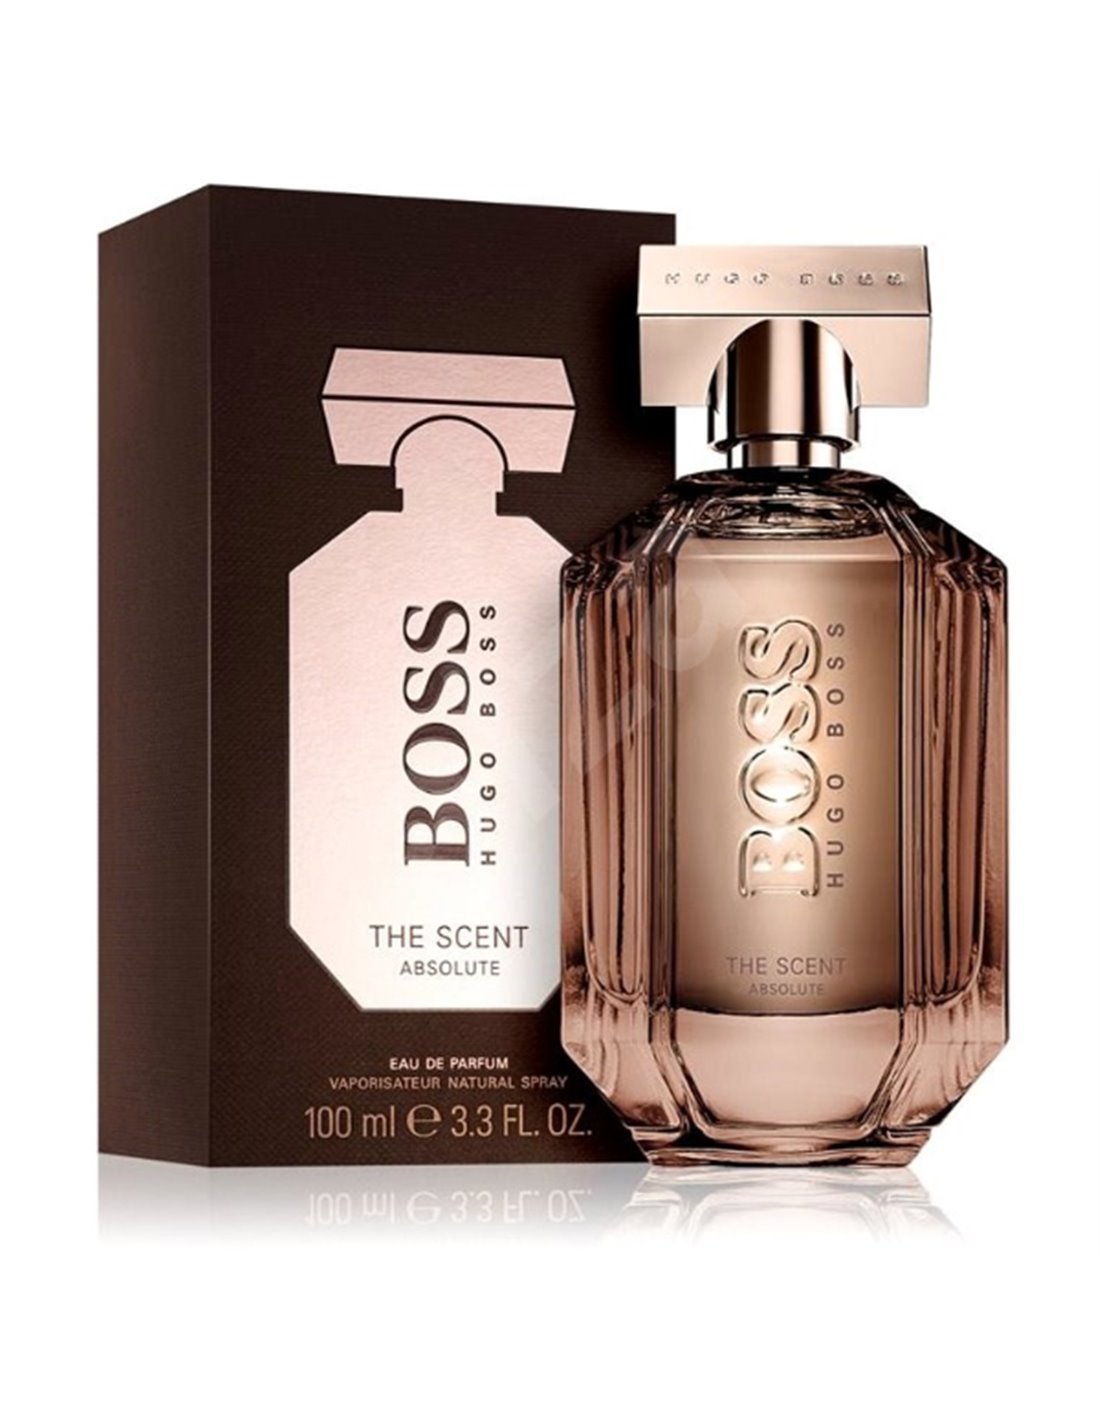 Парфюмерная вода boss the scent for her. Hugo Boss the Scent absolute 100ml. Hugo Boss the Scent le Parfum. Hugo Boss the Scent le Parfum 100 ml. Hugo Boss the Scent for her 100 ml.